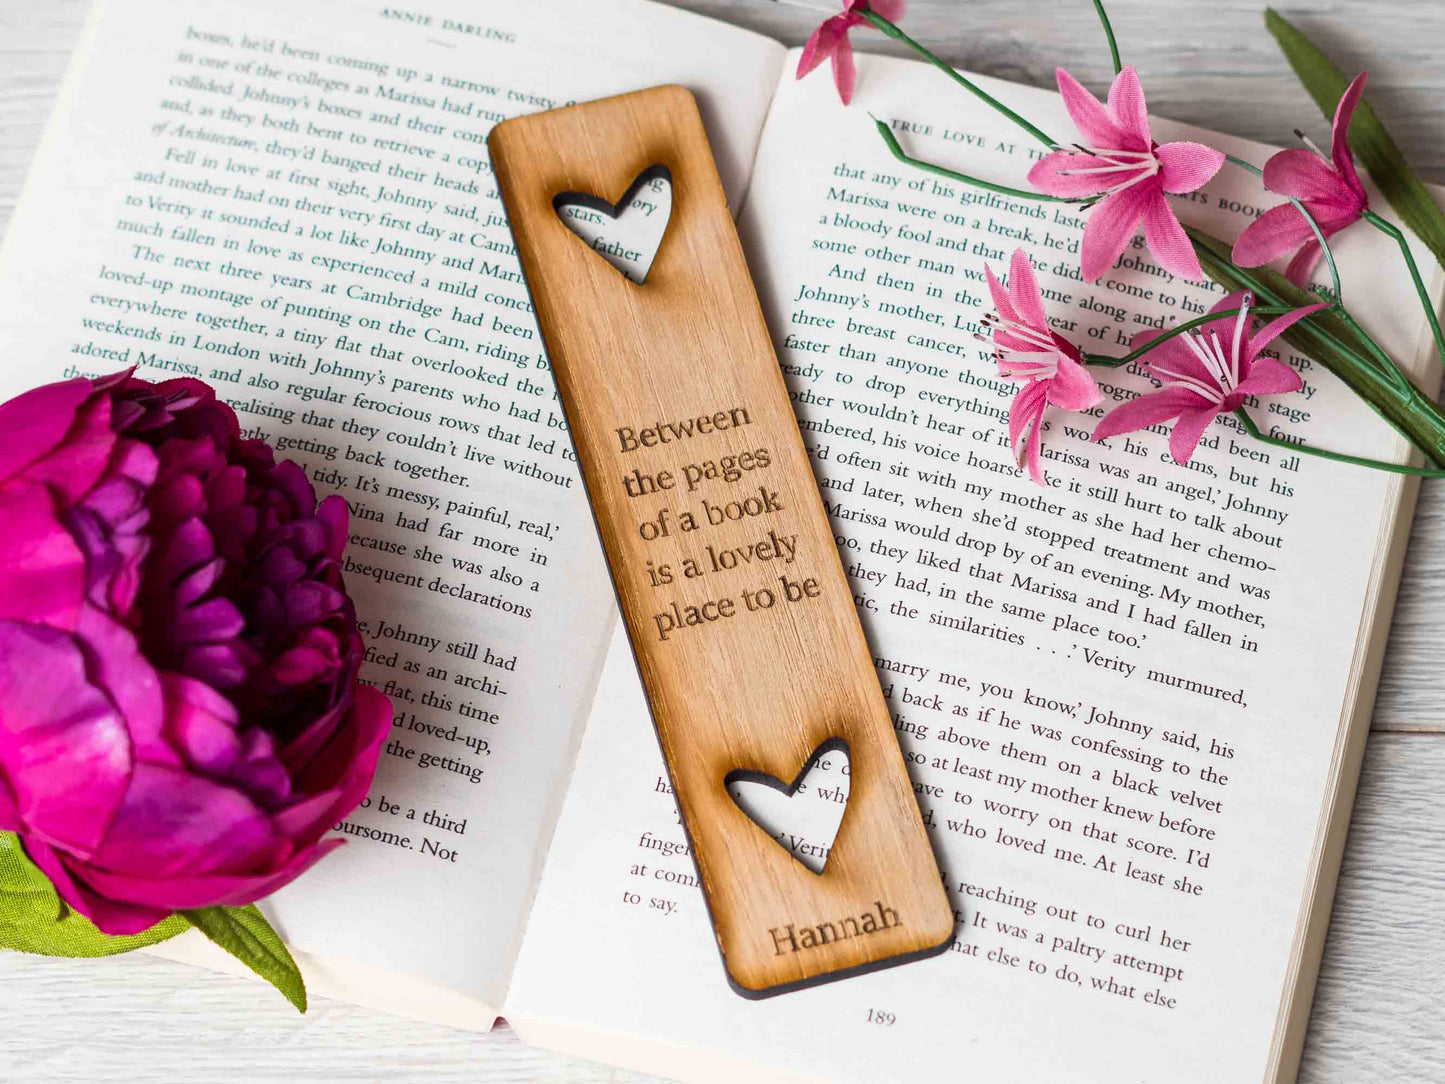 Between the pages of a book is a lovely place to be quoted on bookmark